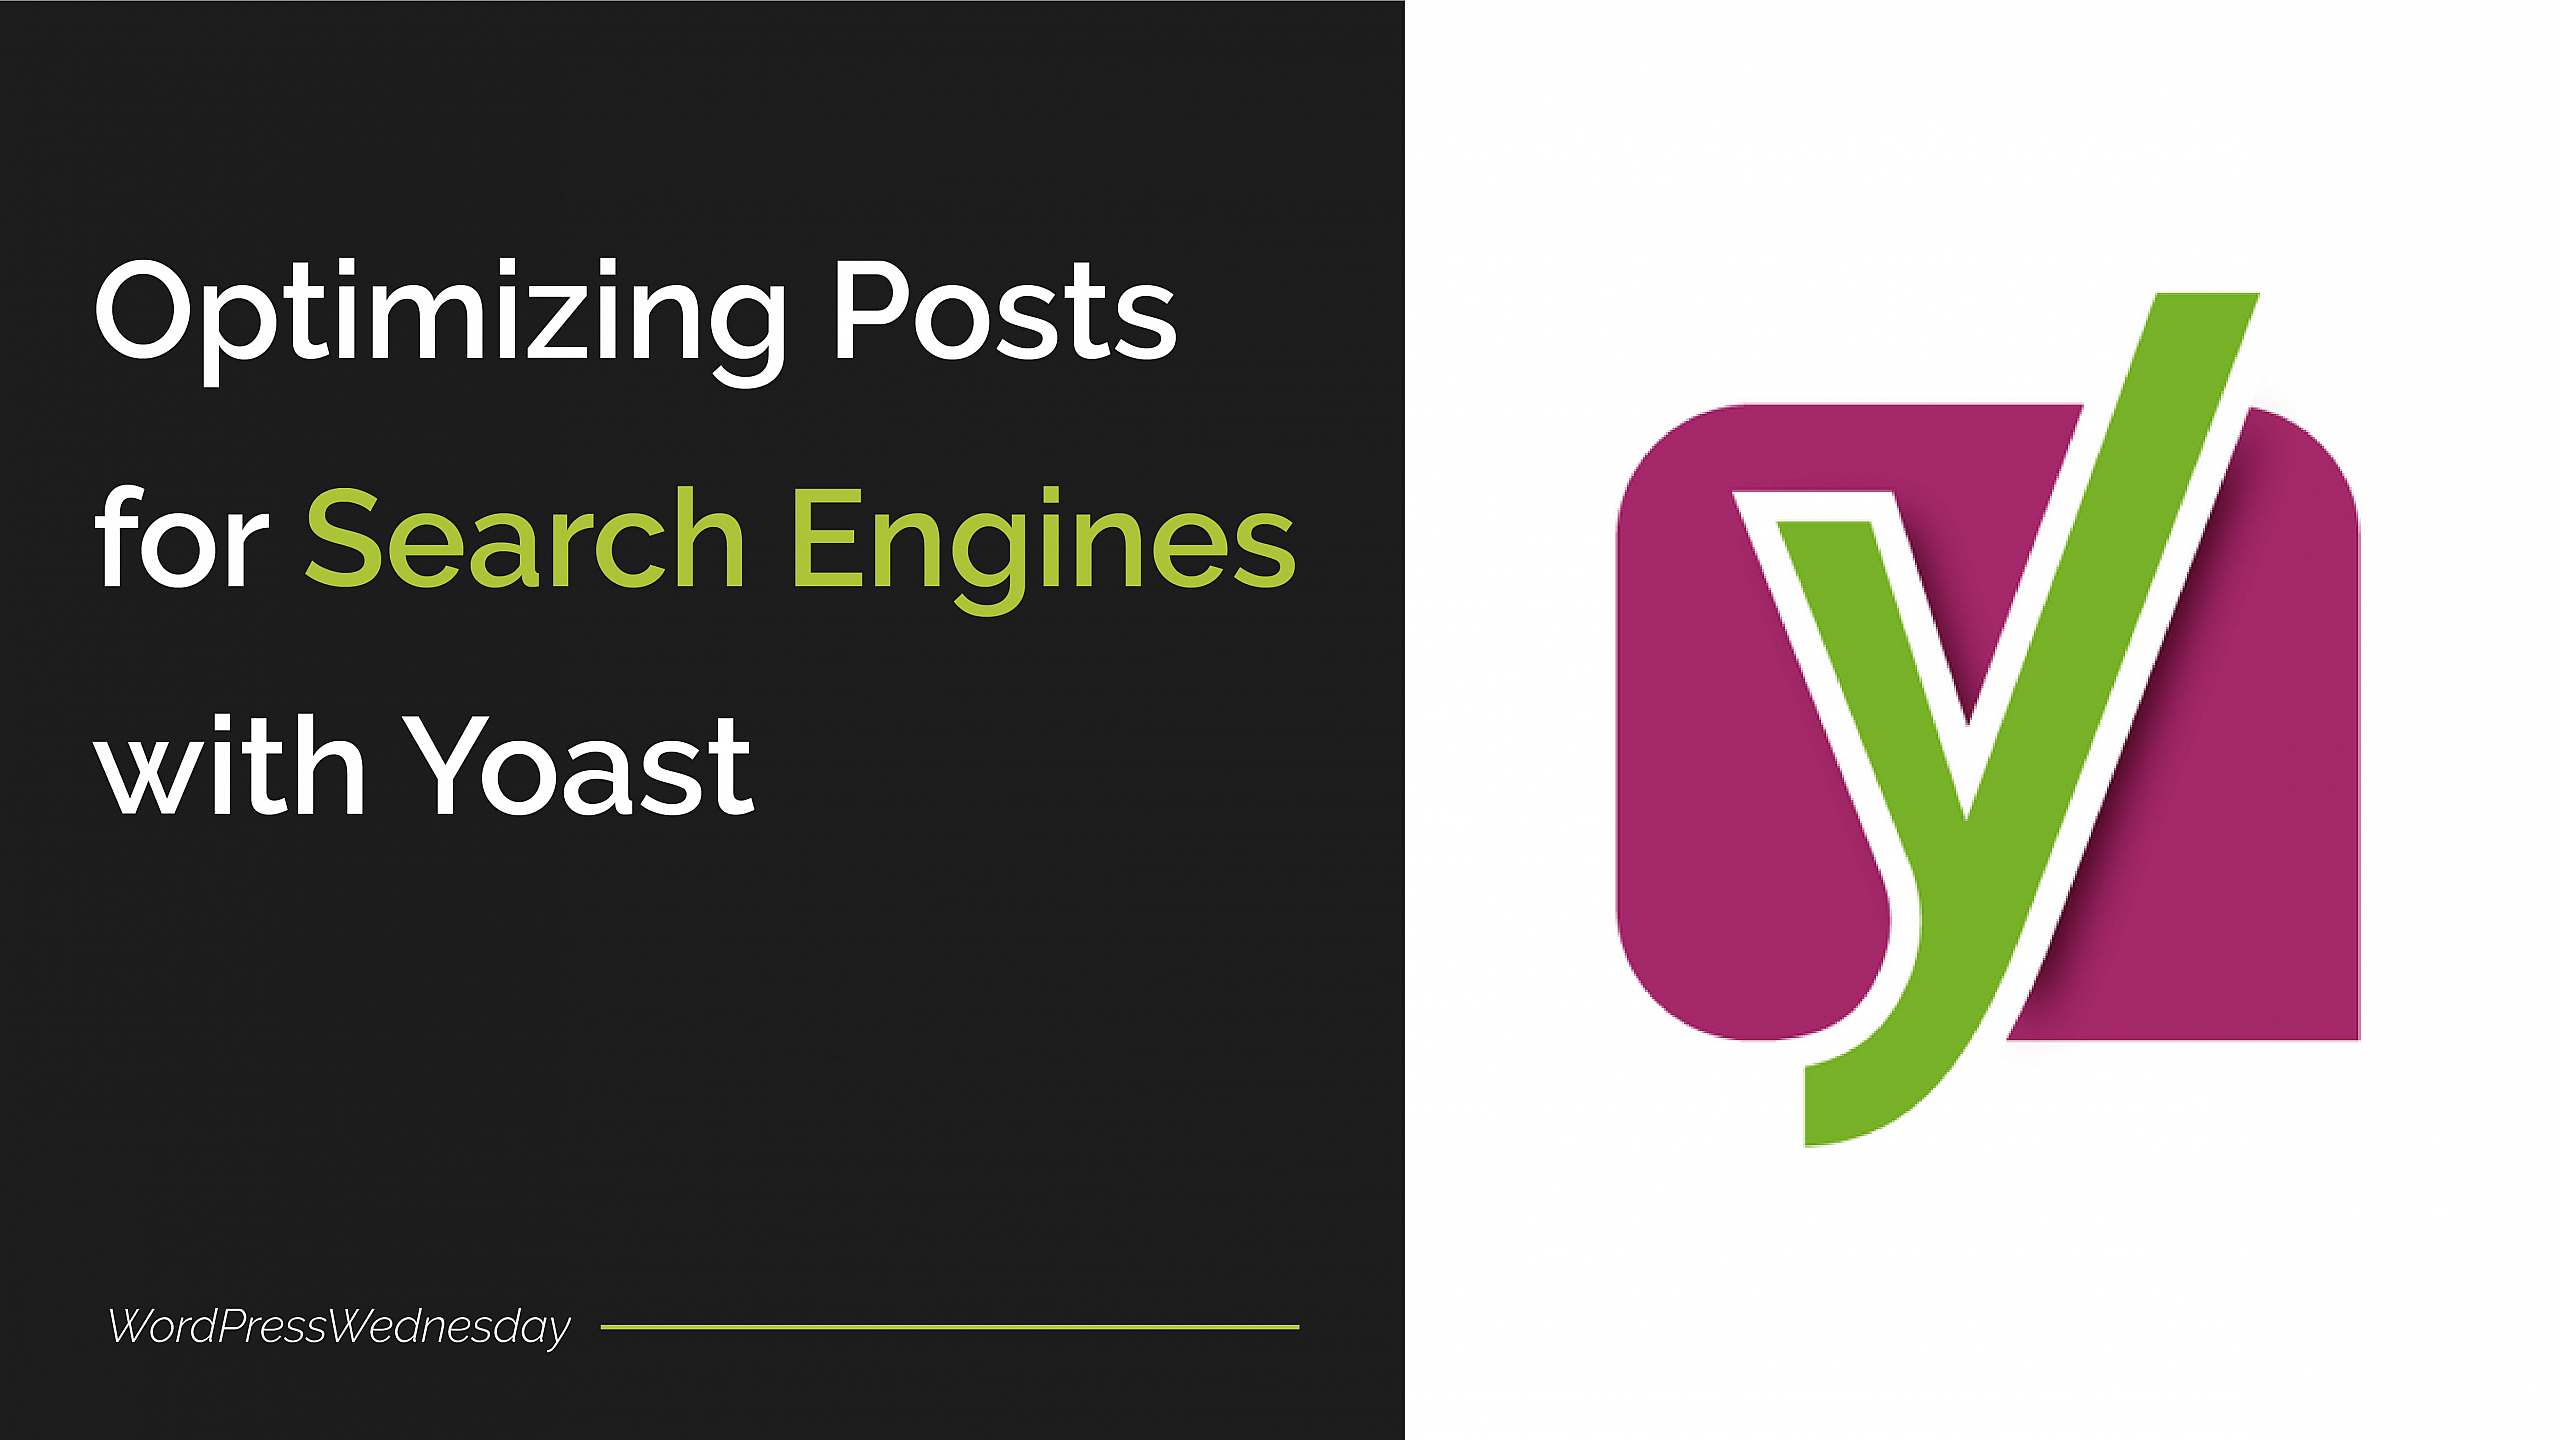 Optimizing Posts for Search Engines with Yoast